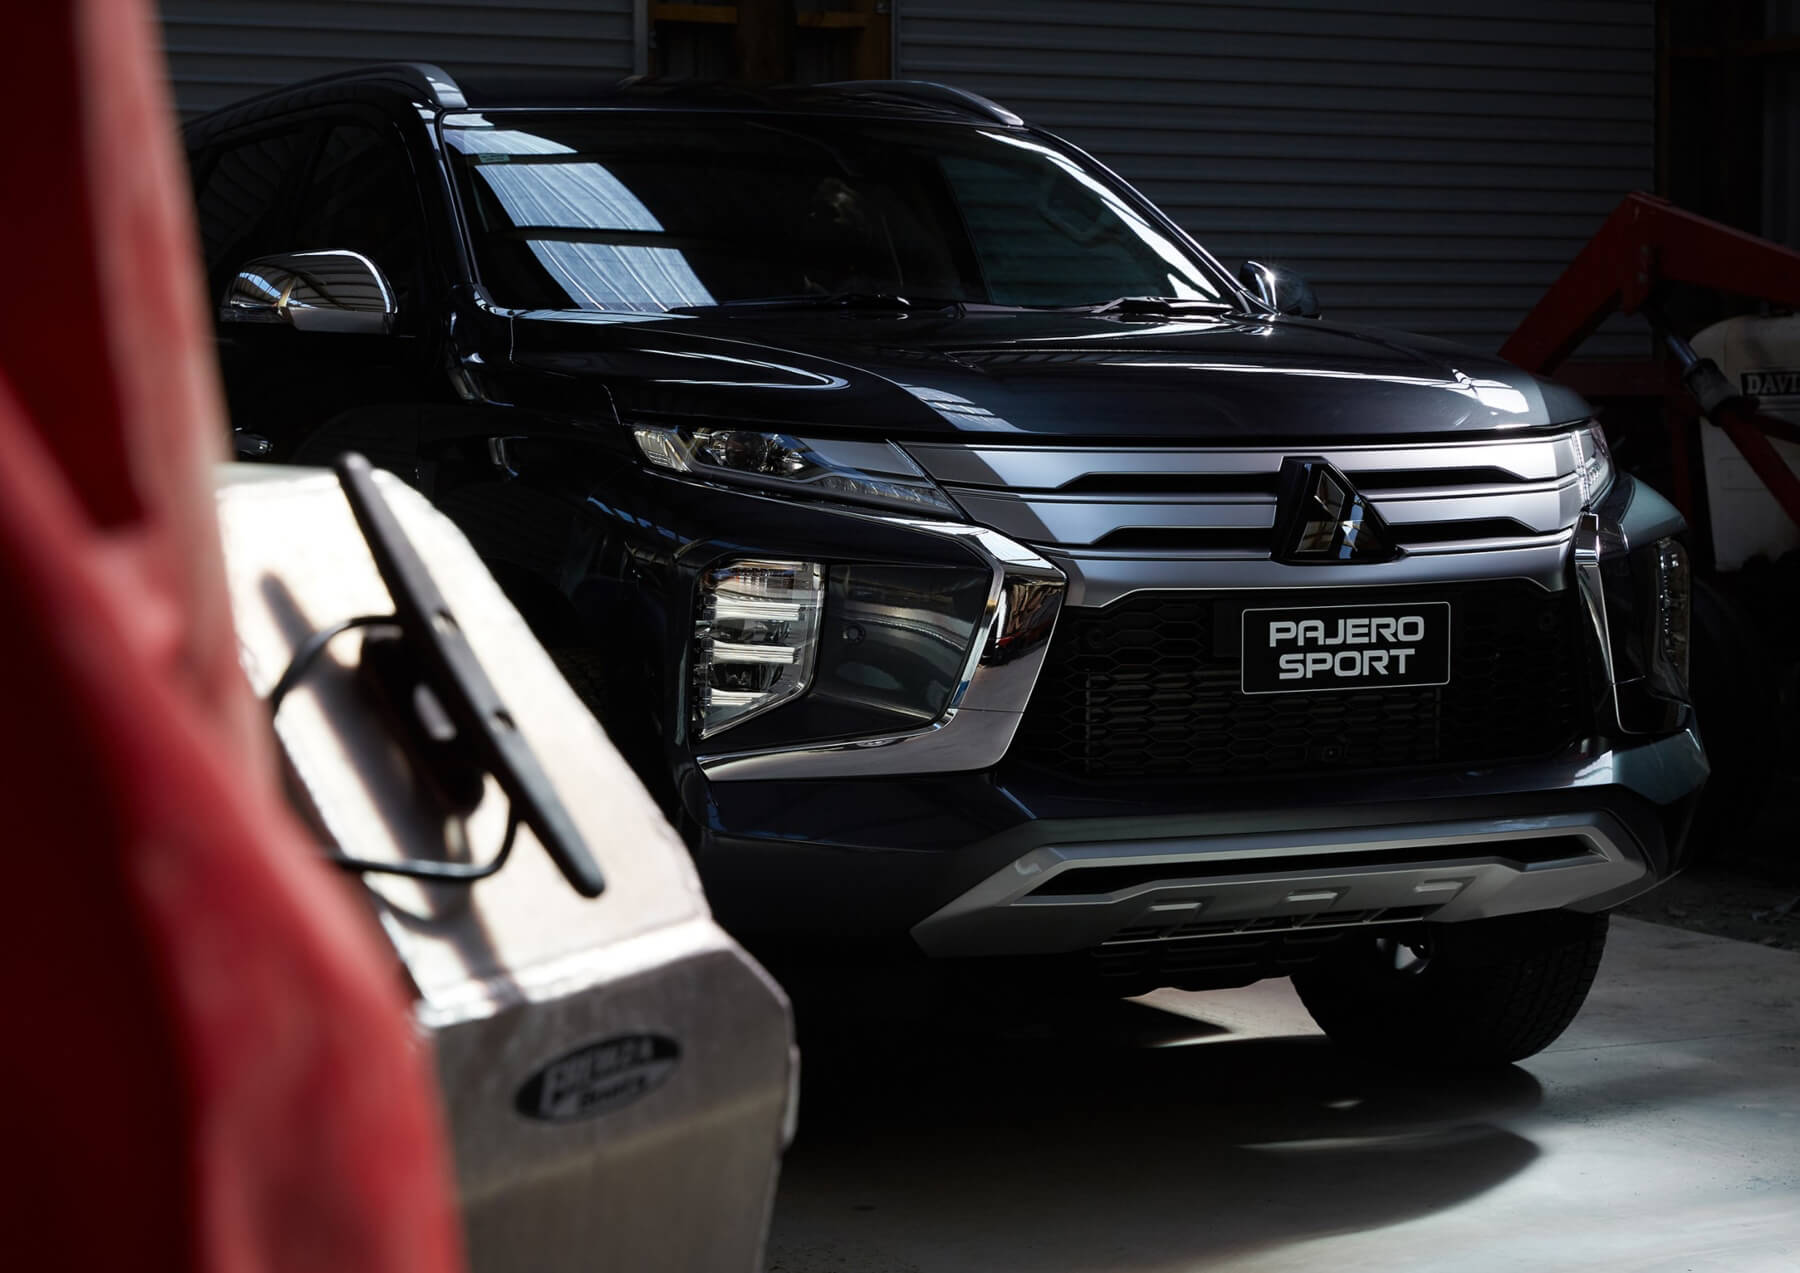 Front of a black Pajero Sport parked in garage